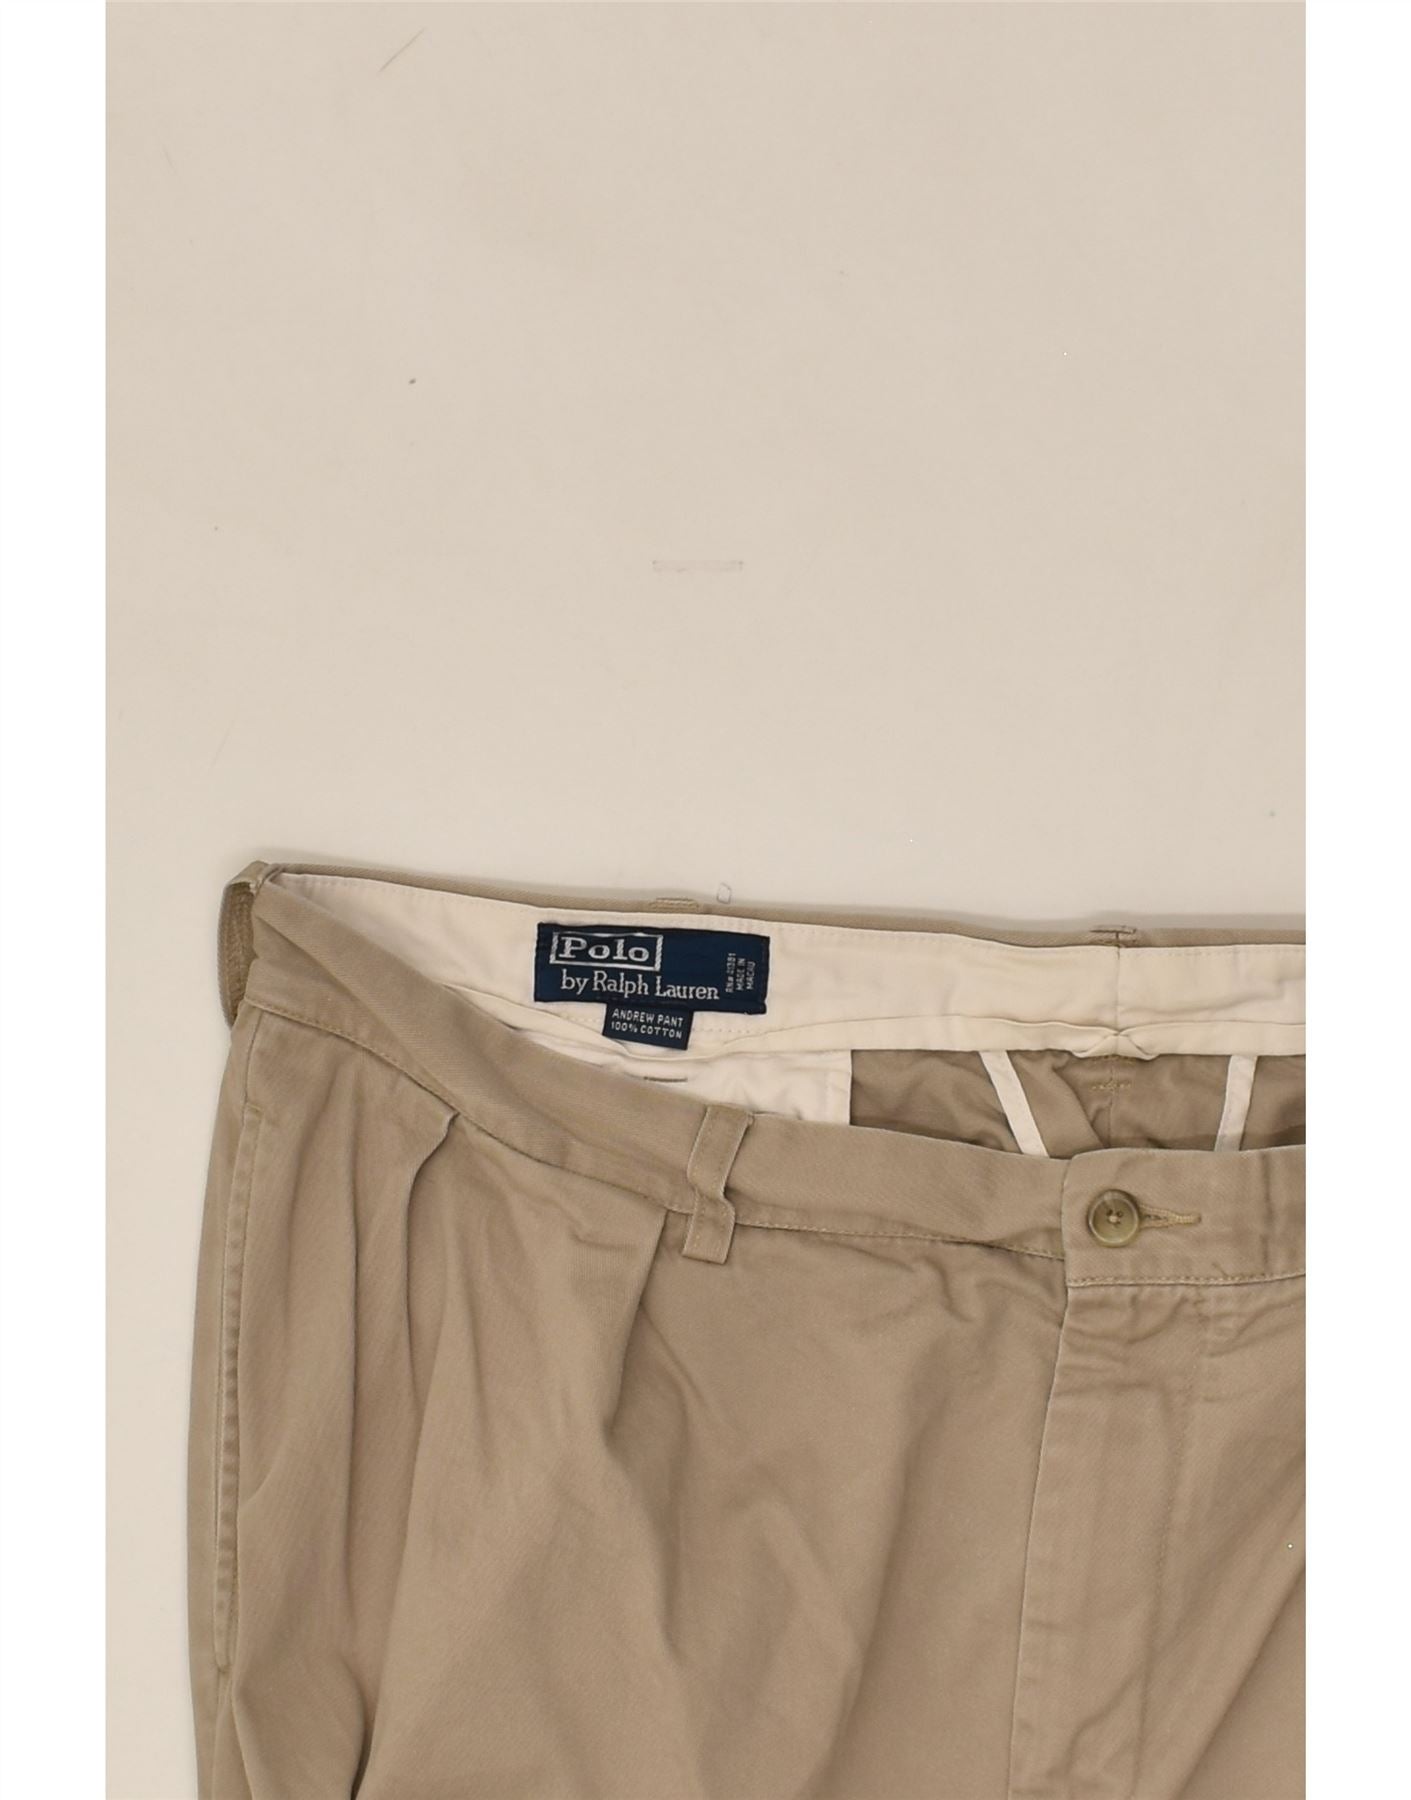 POLO RALPH LAUREN Mens Andrew Pant Pegged Chino Trousers W38 L32 